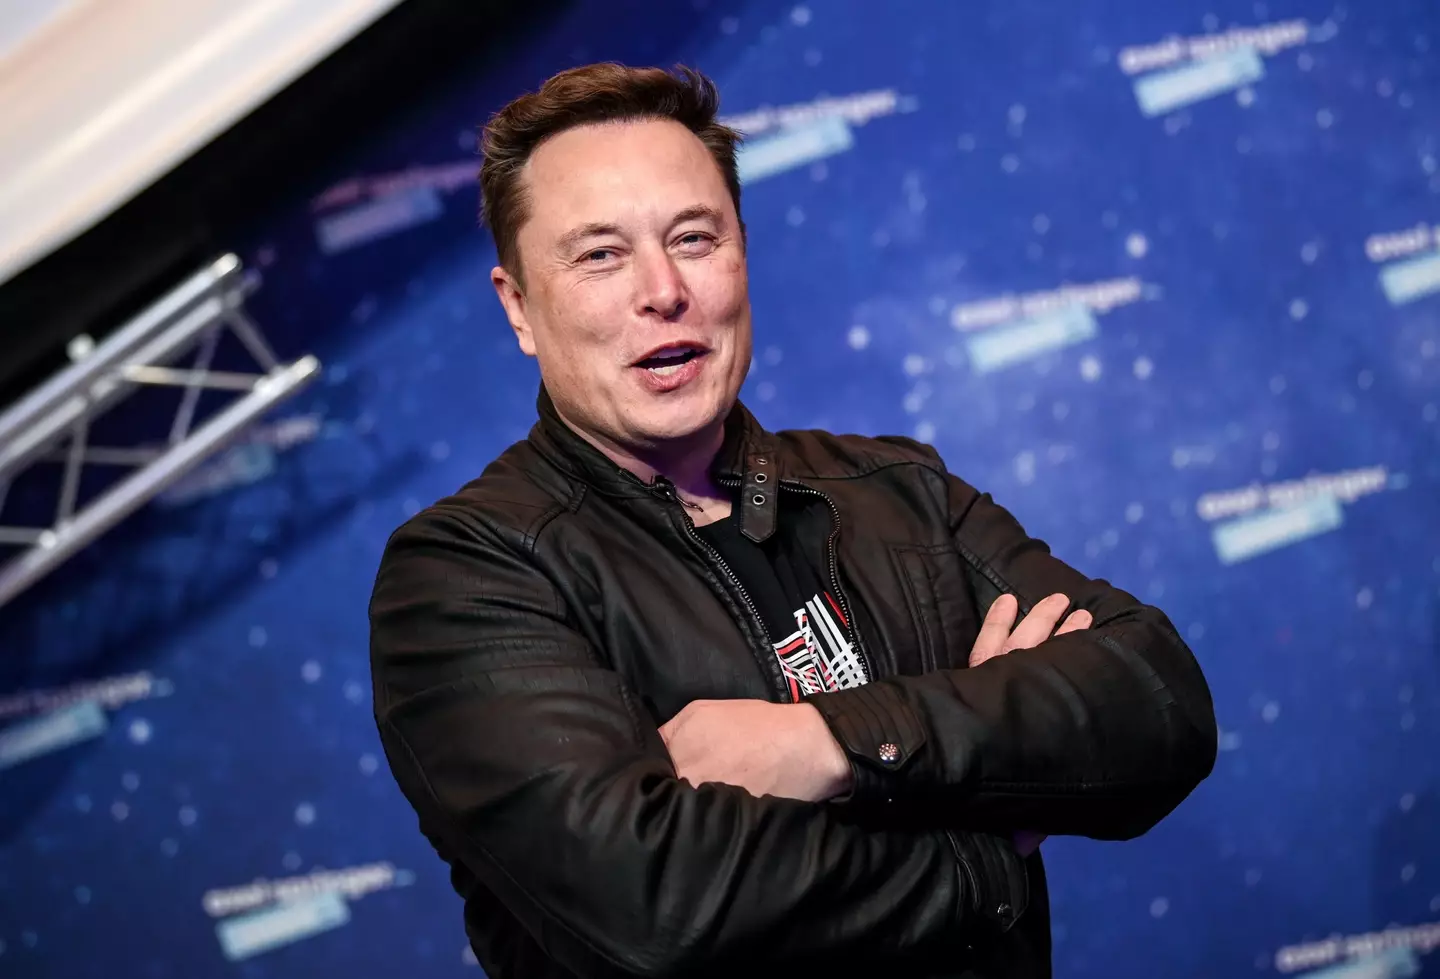 Daymond John believes Elon Musk is making a ‘gangsta move’ with Tesla and SpaceX.